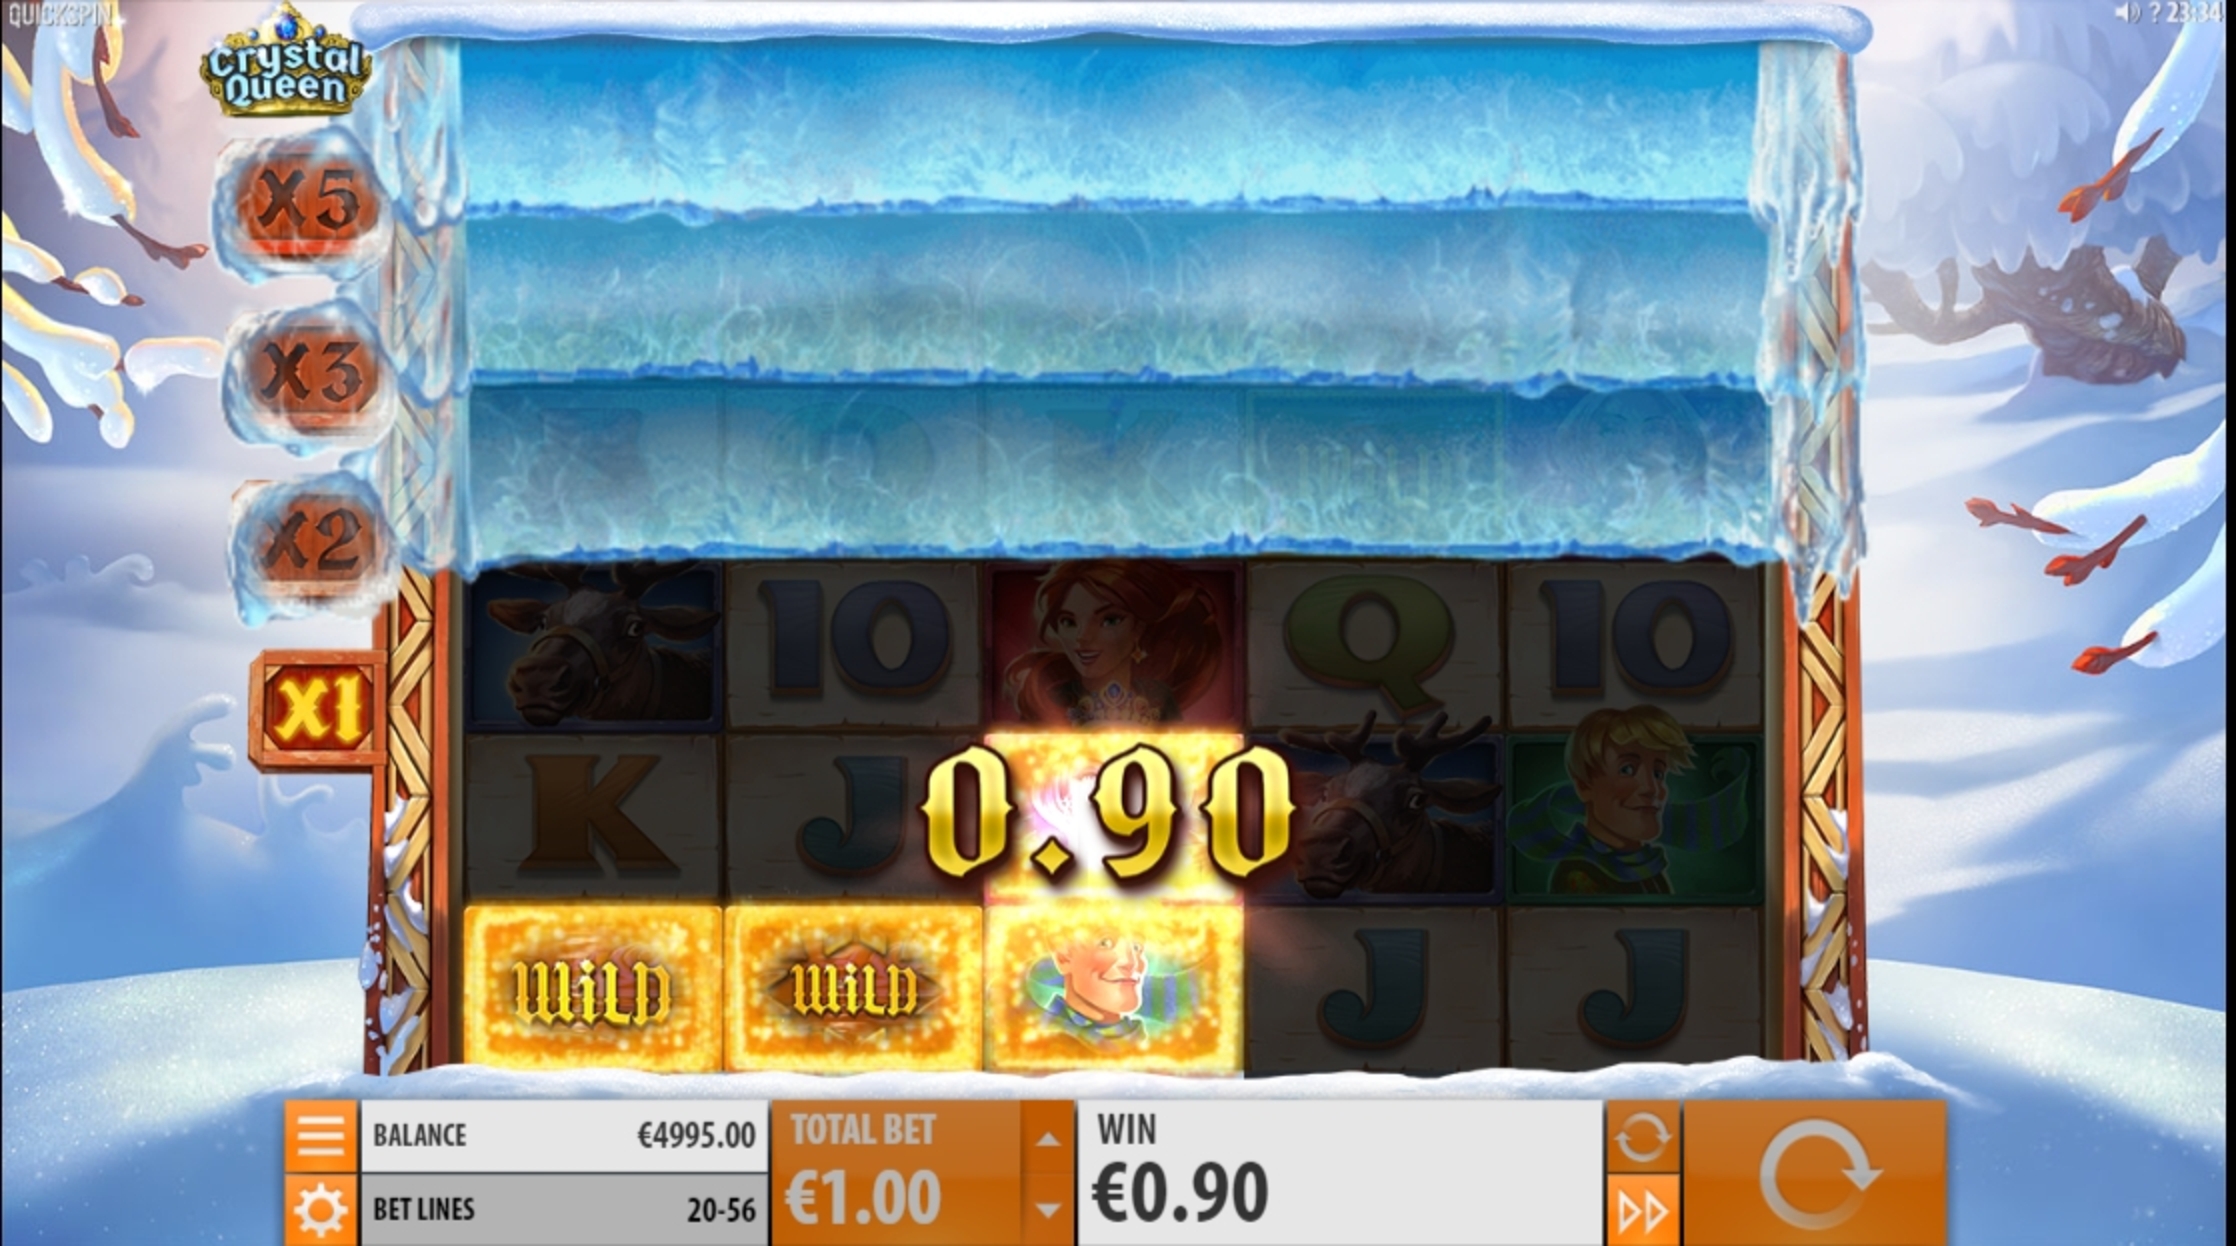 Win Money in Crystal Queen Free Slot Game by Quickspin